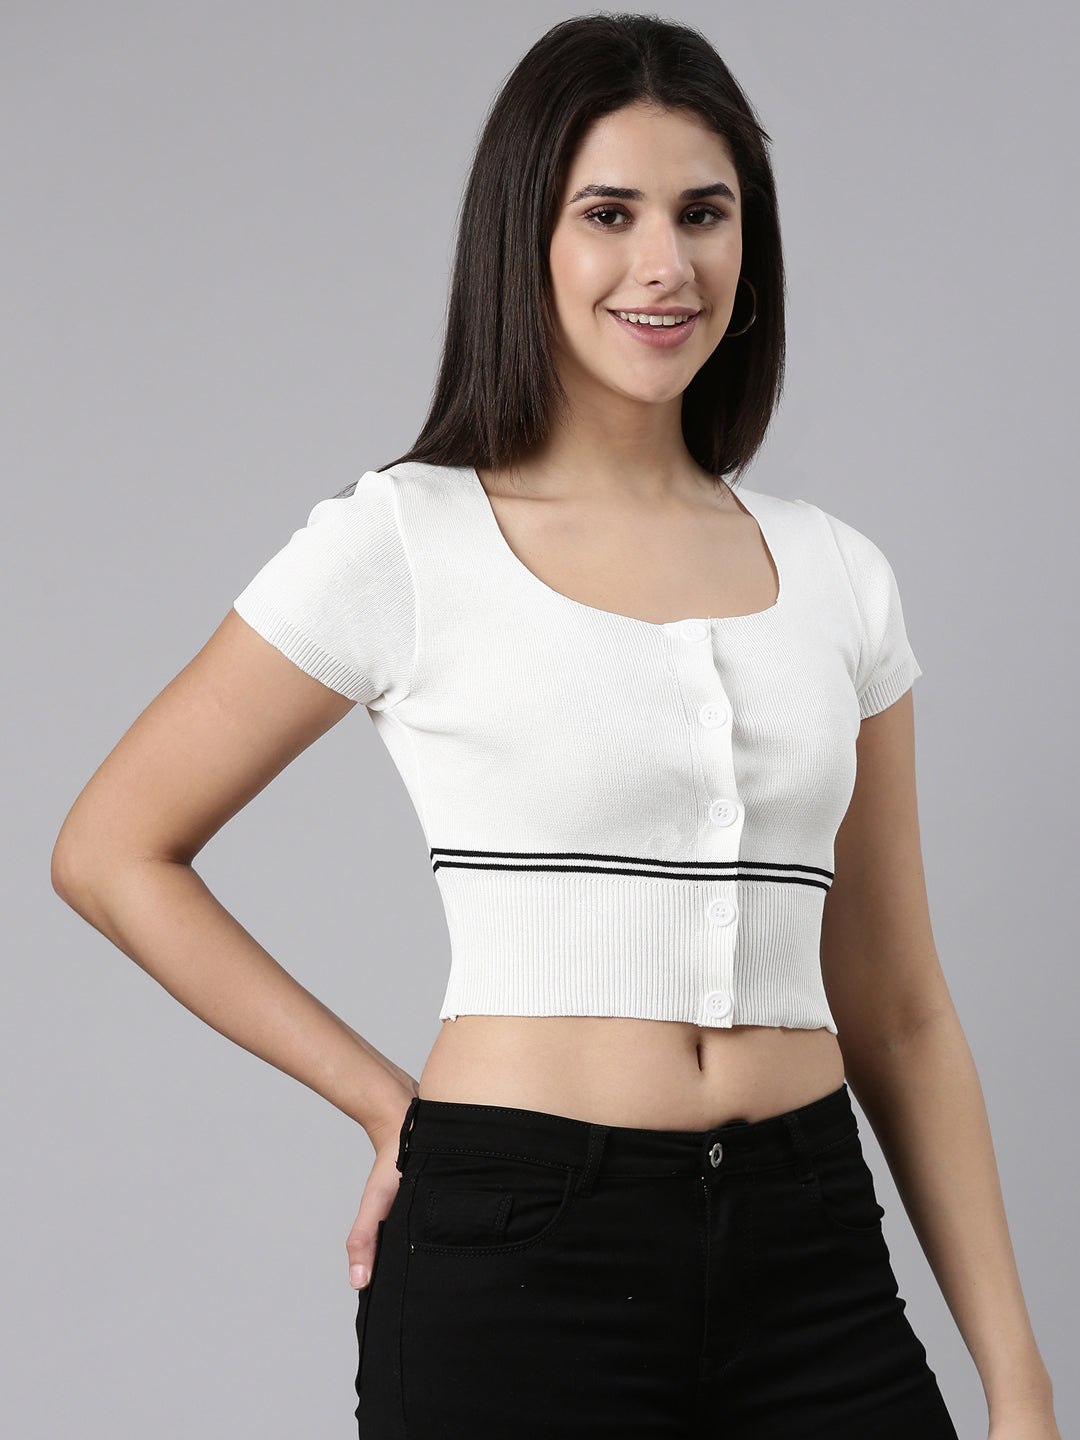 Scoop Neck Solid White Fitted Crop Top